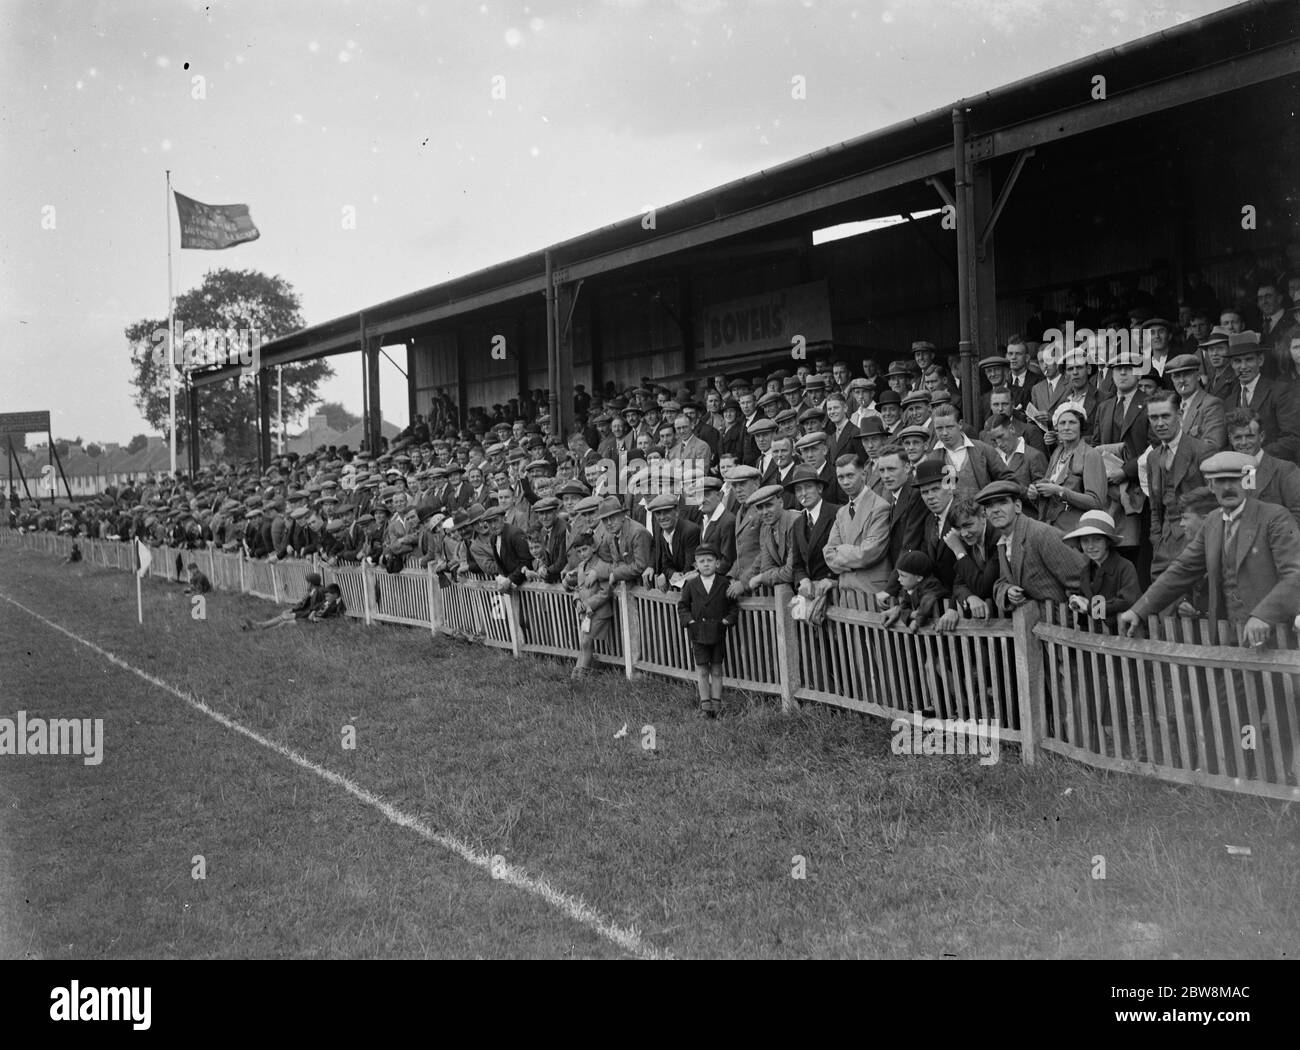 Dartford vs. Guildford City - Southern League - Crowd - 14/09/35 Football spectators in the stand at Dartford Football Club . 1935 Stock Photo